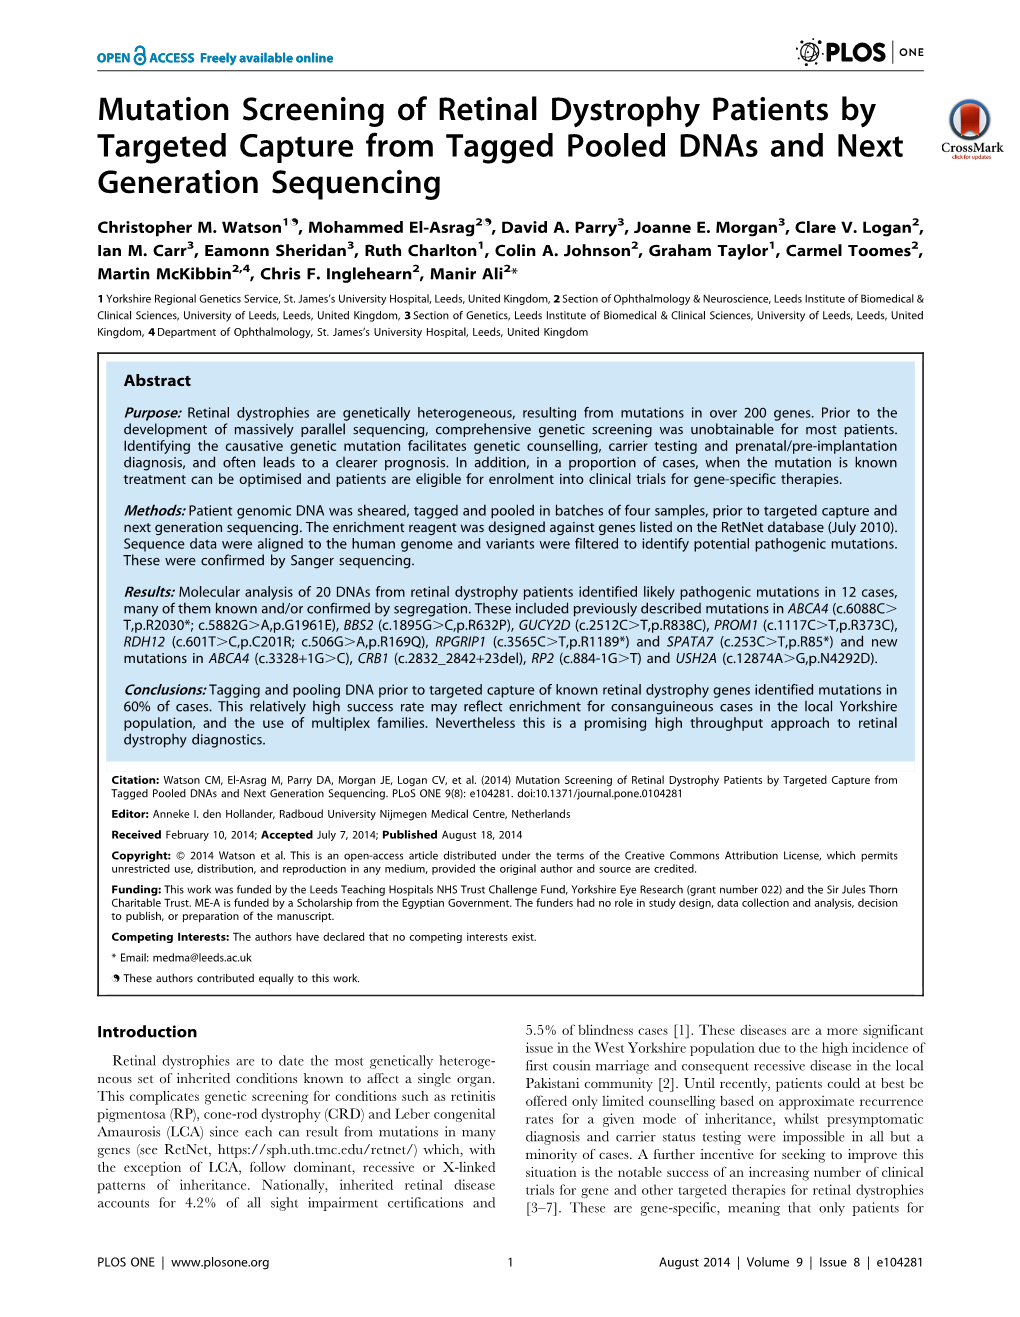 Mutation Screening of Retinal Dystrophy Patients by Targeted Capture from Tagged Pooled Dnas and Next Generation Sequencing